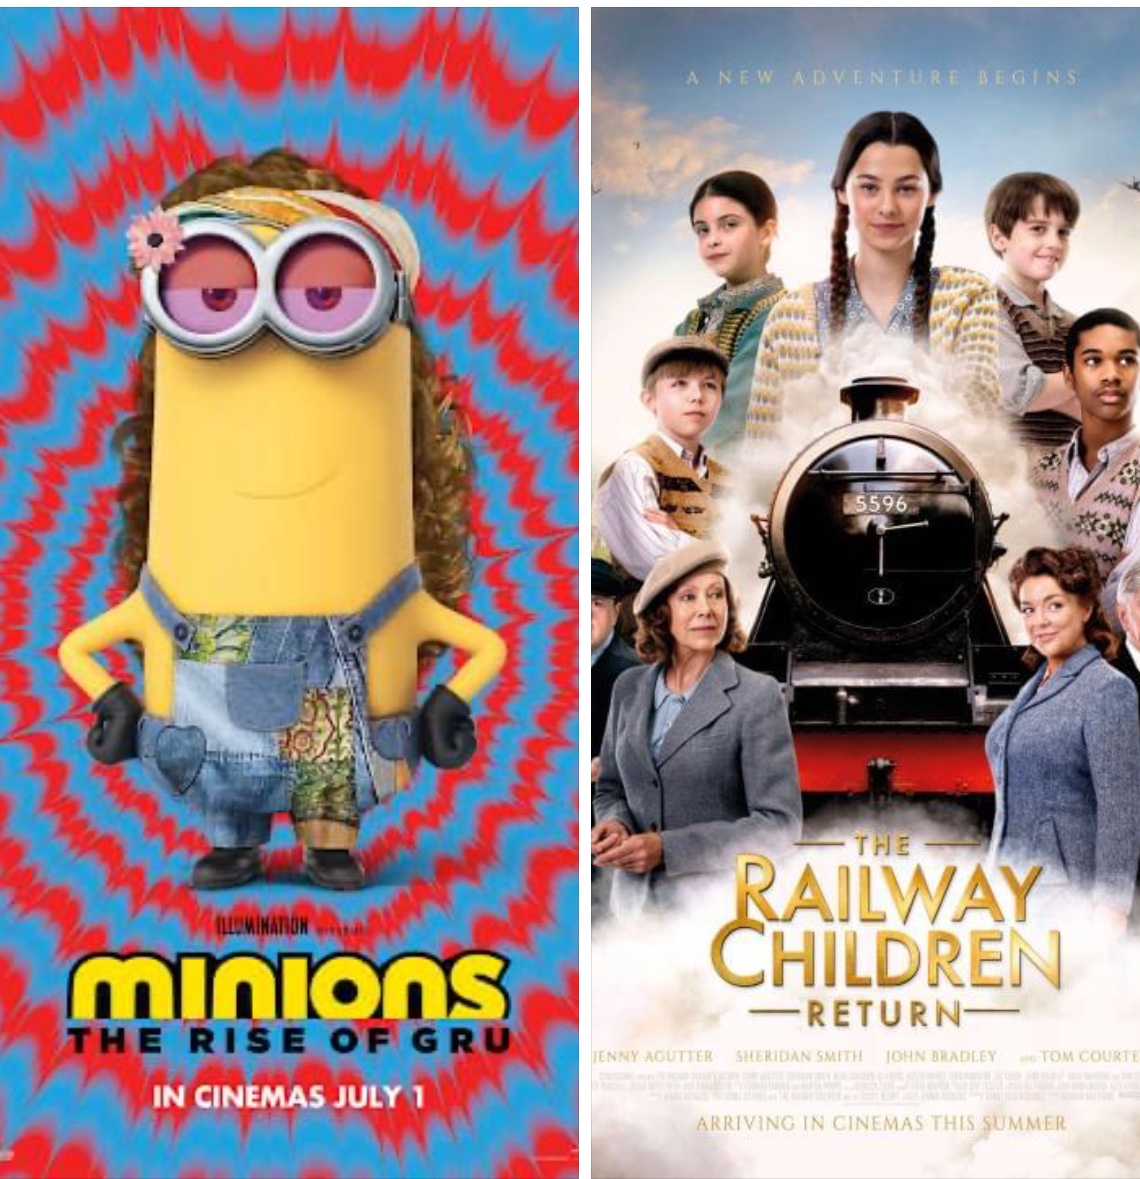 test Twitter Media - 🤩THIS WEEK AT THE FRASER CENTRE🤩

🍿The Railway Children Return (PG)
Thursday 18th August 10.30am
Friday 19th August 7pm

🍿Minions: The Rise of Gru (U)
Saturday 20th August 2pm

Box Office Wed-Fri 10am-1pm & Sat 1pm-4pm or https://t.co/8faP2AuWus https://t.co/ZJHyvz8Fbx